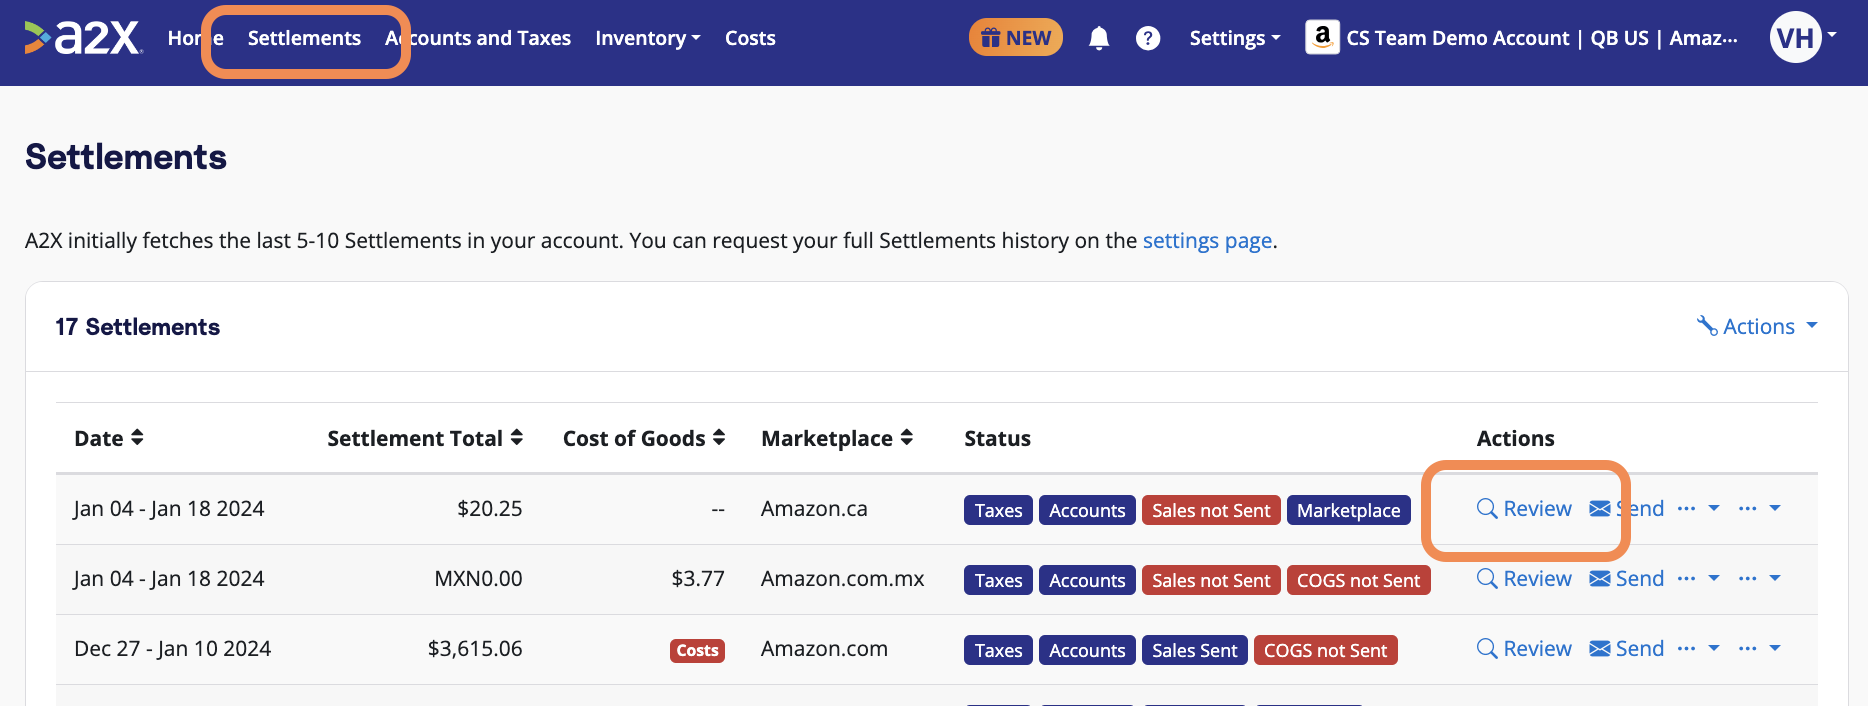 Review Amazon settlements in A2X  before sending to QuickBooks Online